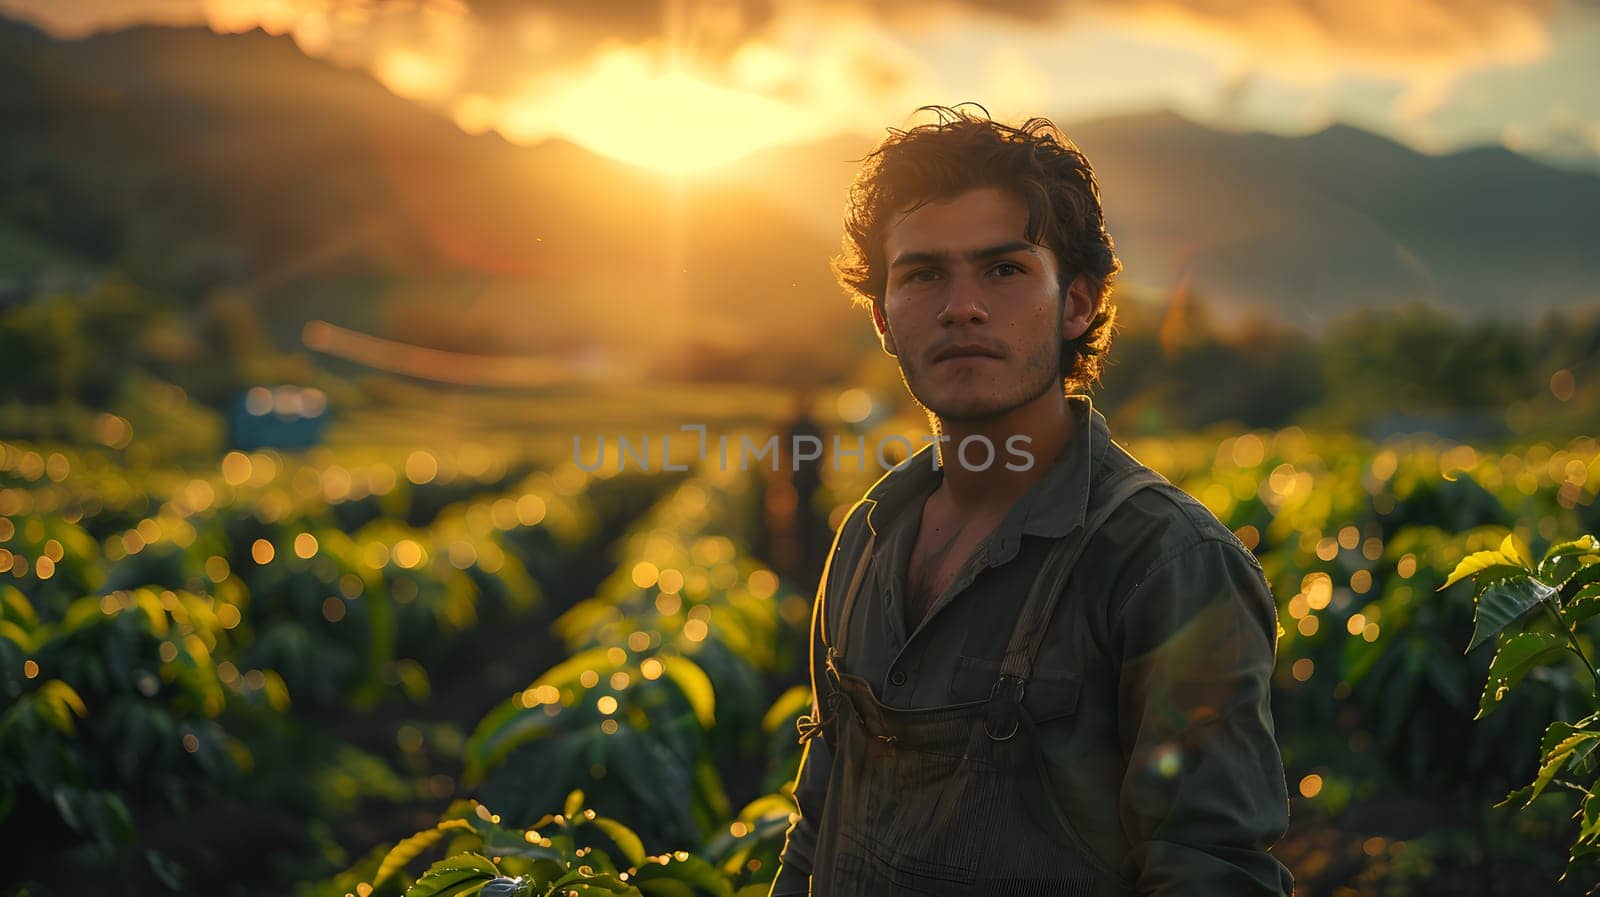 A man is happily standing among the plants in a natural landscape at sunset, with clouds and sunlight creating a picturesque scene. Flash photography captures the beauty of the agriculture field